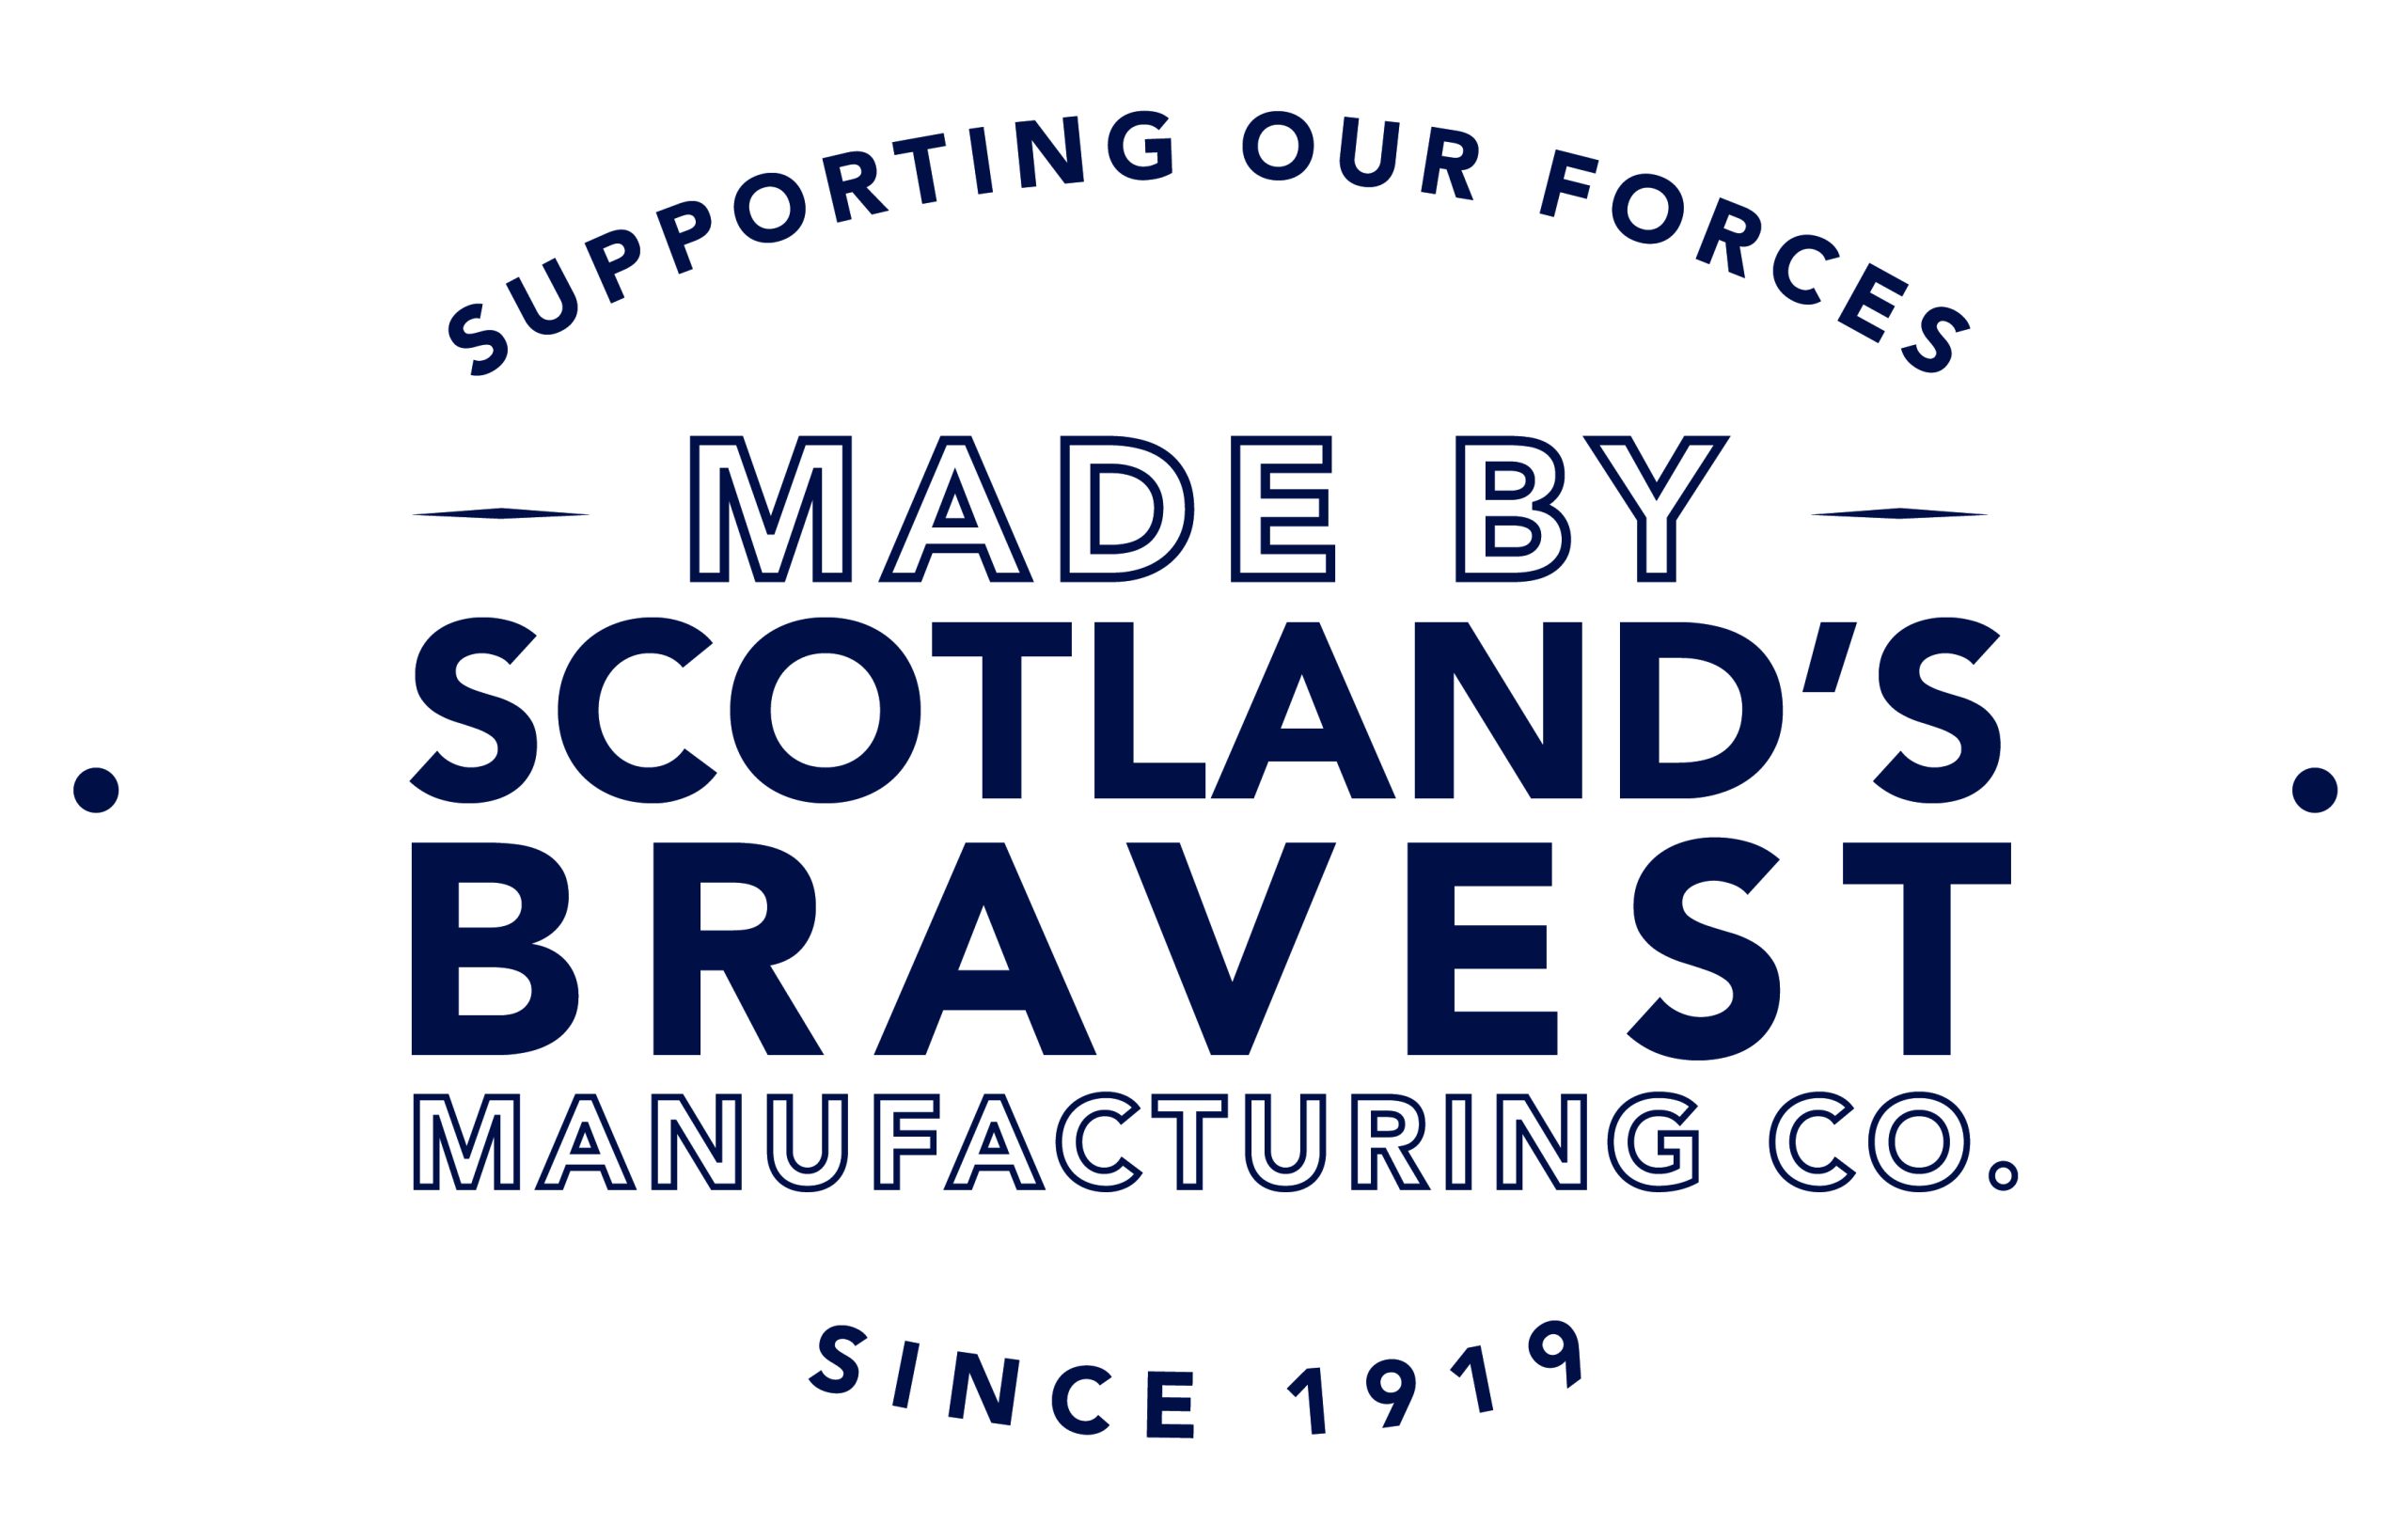 Image showing Scotland's Bravest Manufacturing Company